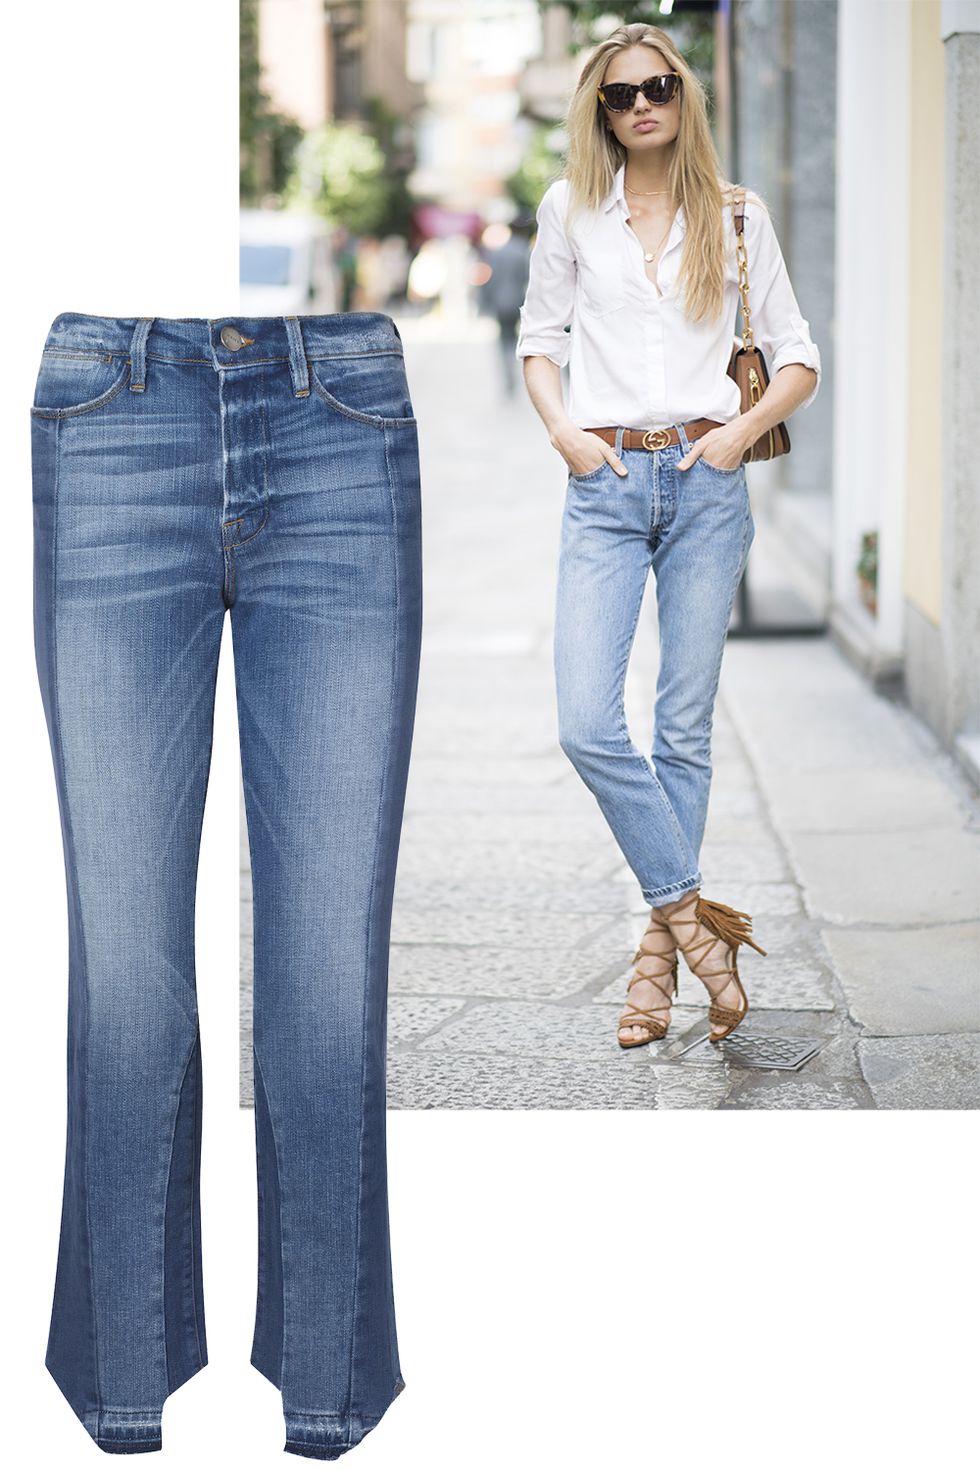 <p>Who: Romee Strijd<span class="redactor-invisible-space"></span></p><p><span class="redactor-invisible-space">What: Well-fitted, faded jeans and a white button down with great heels is a no-brainer look for appearing nonchalant and very cool.&nbsp;</span></p><p><em data-redactor-tag="em" data-verified="redactor">Frame deans, $270, <a href="https://www.net-a-porter.com/us/en/Shop/Designers/FRAME?pn=1&amp;npp=60&amp;image_view=product&amp;dScroll=0" target="_blank">net-a-porter.com</a></em><span class="redactor-invisible-space" data-verified="redactor" data-redactor-tag="span" data-redactor-class="redactor-invisible-space"><em data-redactor-tag="em" data-verified="redactor">.&nbsp;</em></span></p>